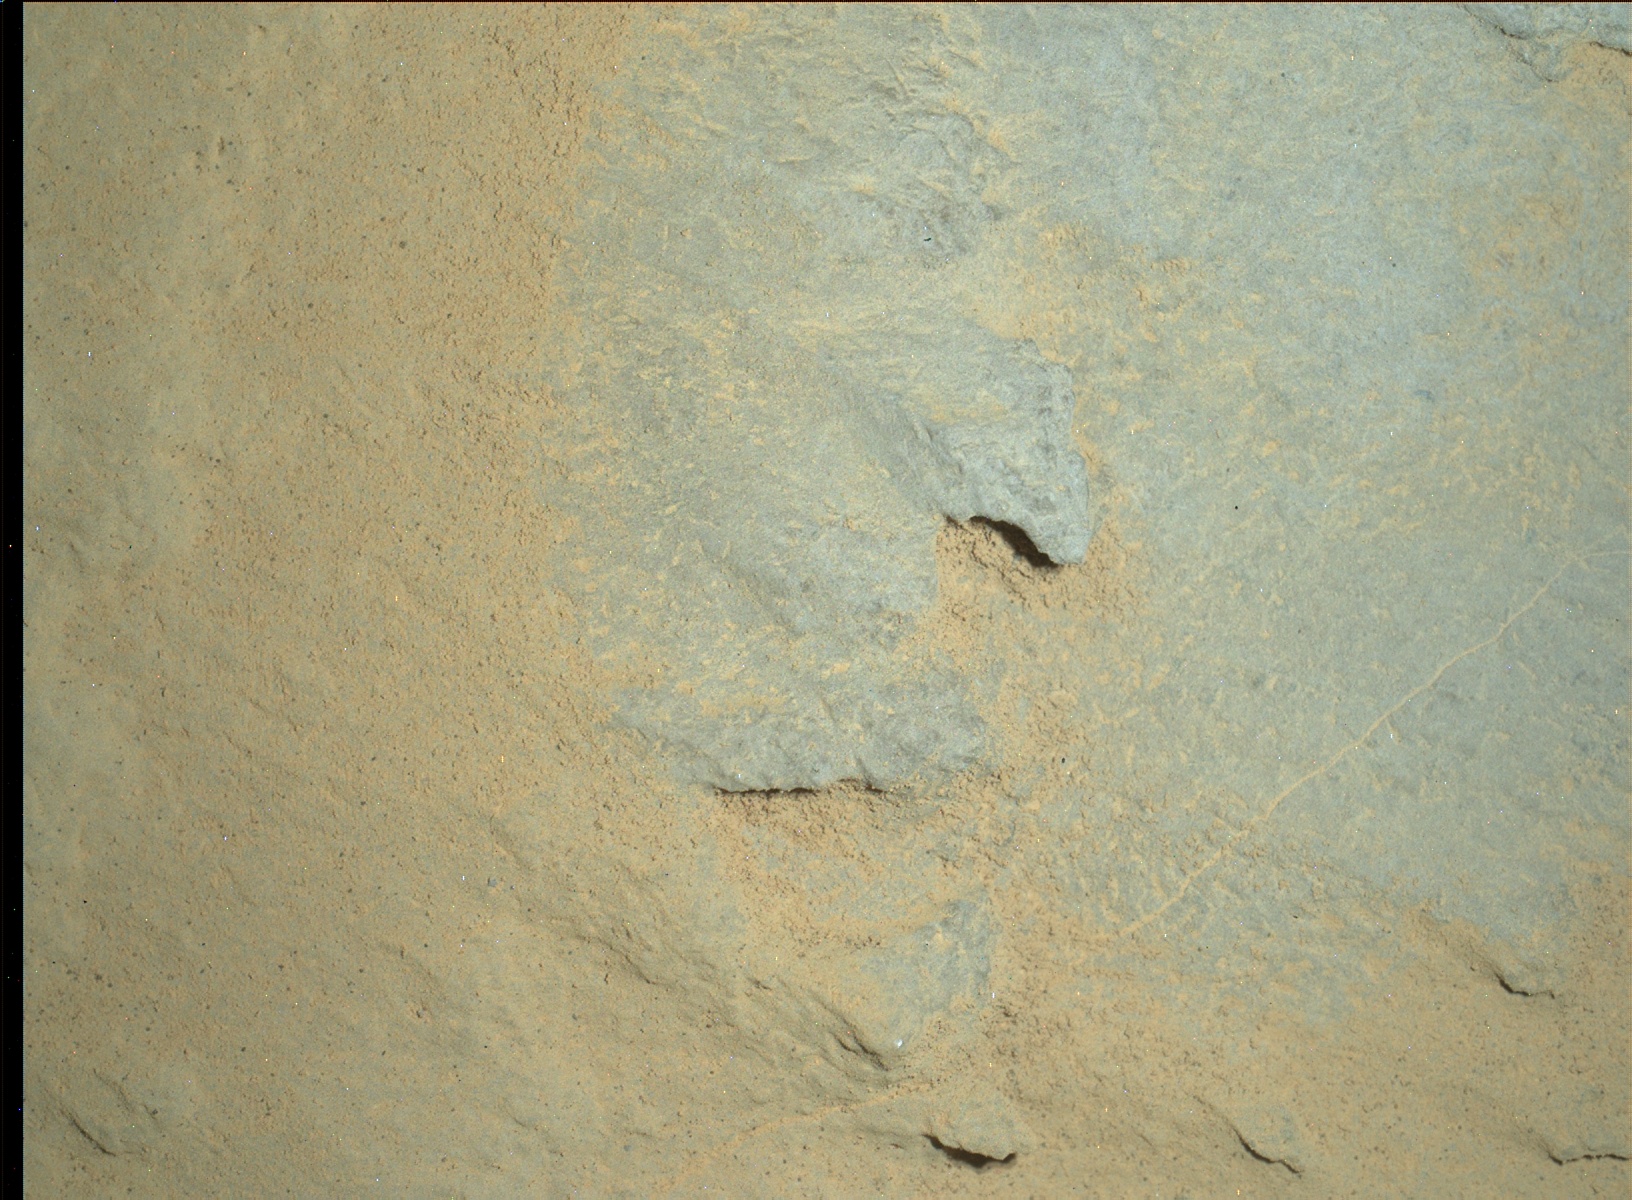 Nasa's Mars rover Curiosity acquired this image using its Mars Hand Lens Imager (MAHLI) on Sol 808